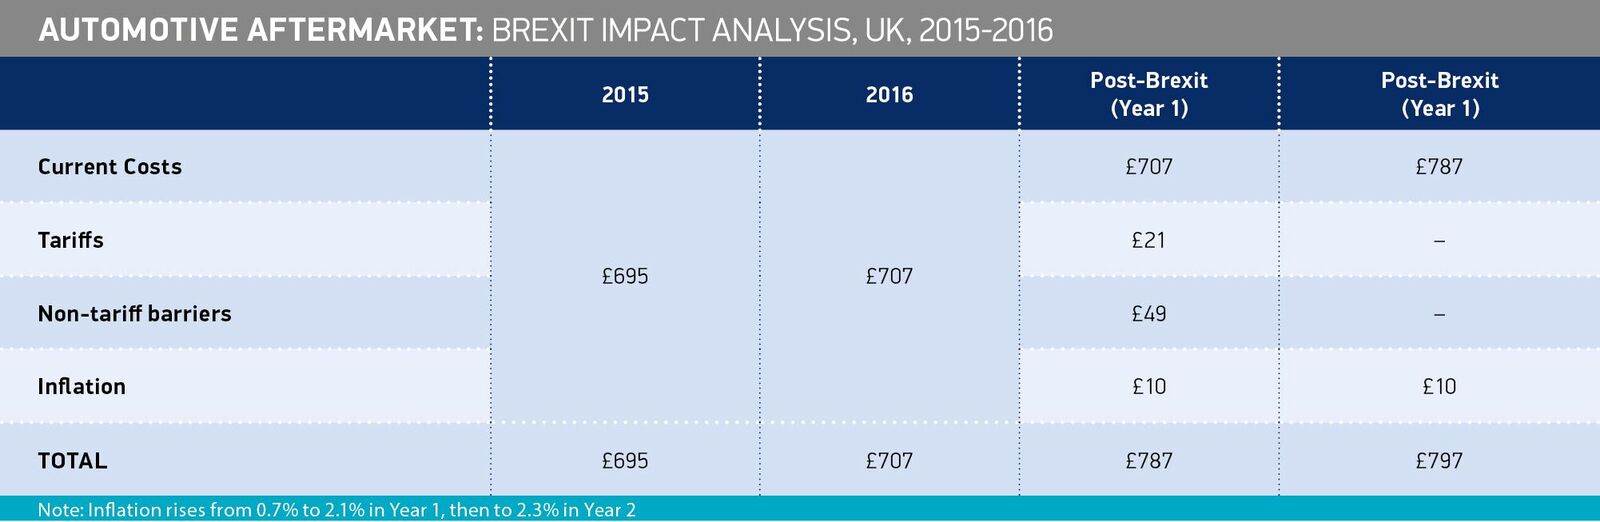 aftermarket-brexit-table